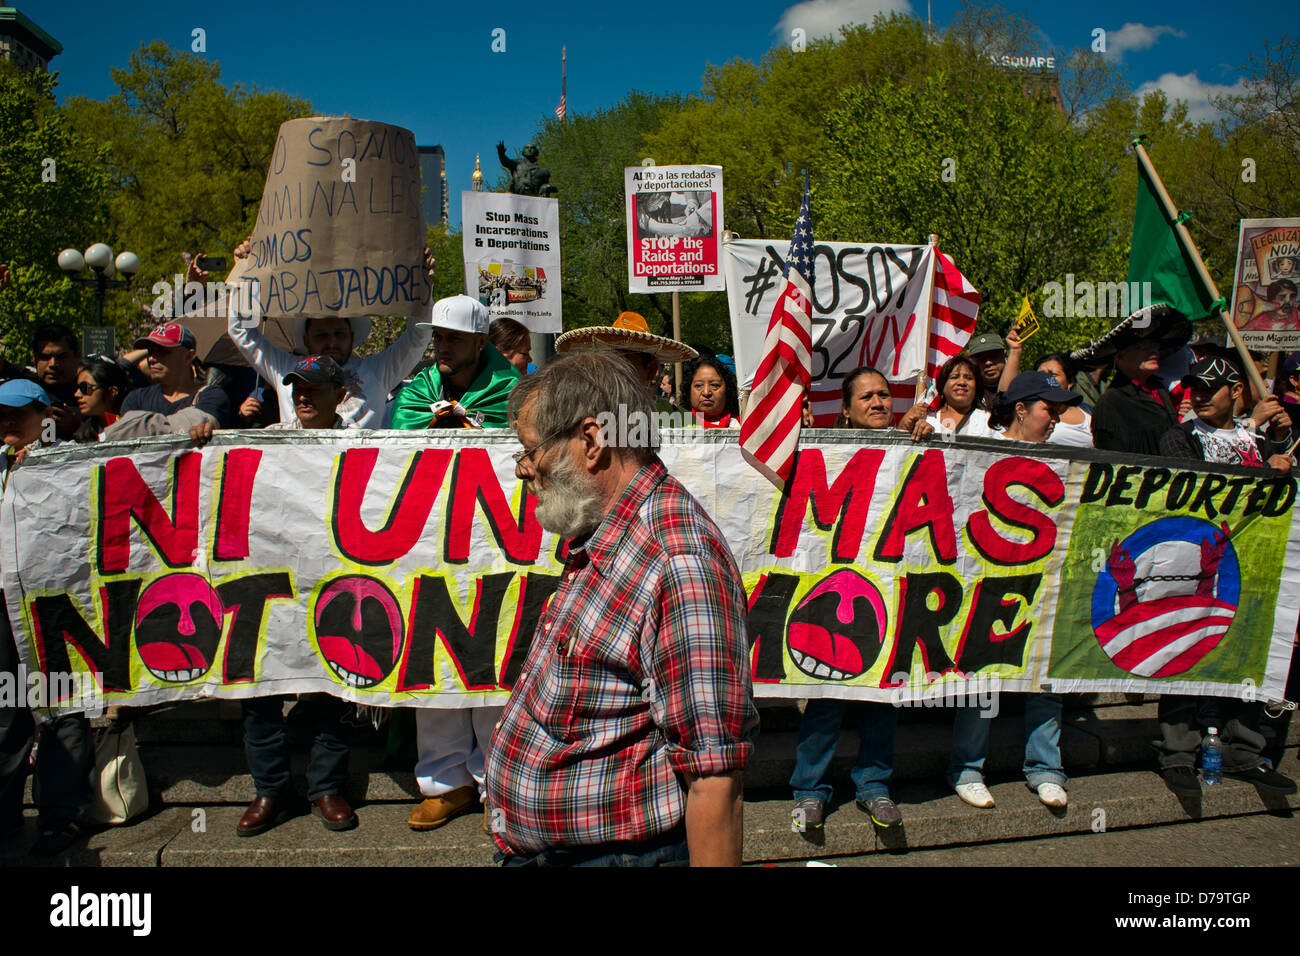 Wednesday, May 1, 2013, New York, NY, US:  Protesters gather in New York's Union Square to mark  International Workers' Day, also known as May Day.  These demonstrators held a sign reading 'Ni un mas' and 'Not one more' to protest United States immigration laws. Stock Photo